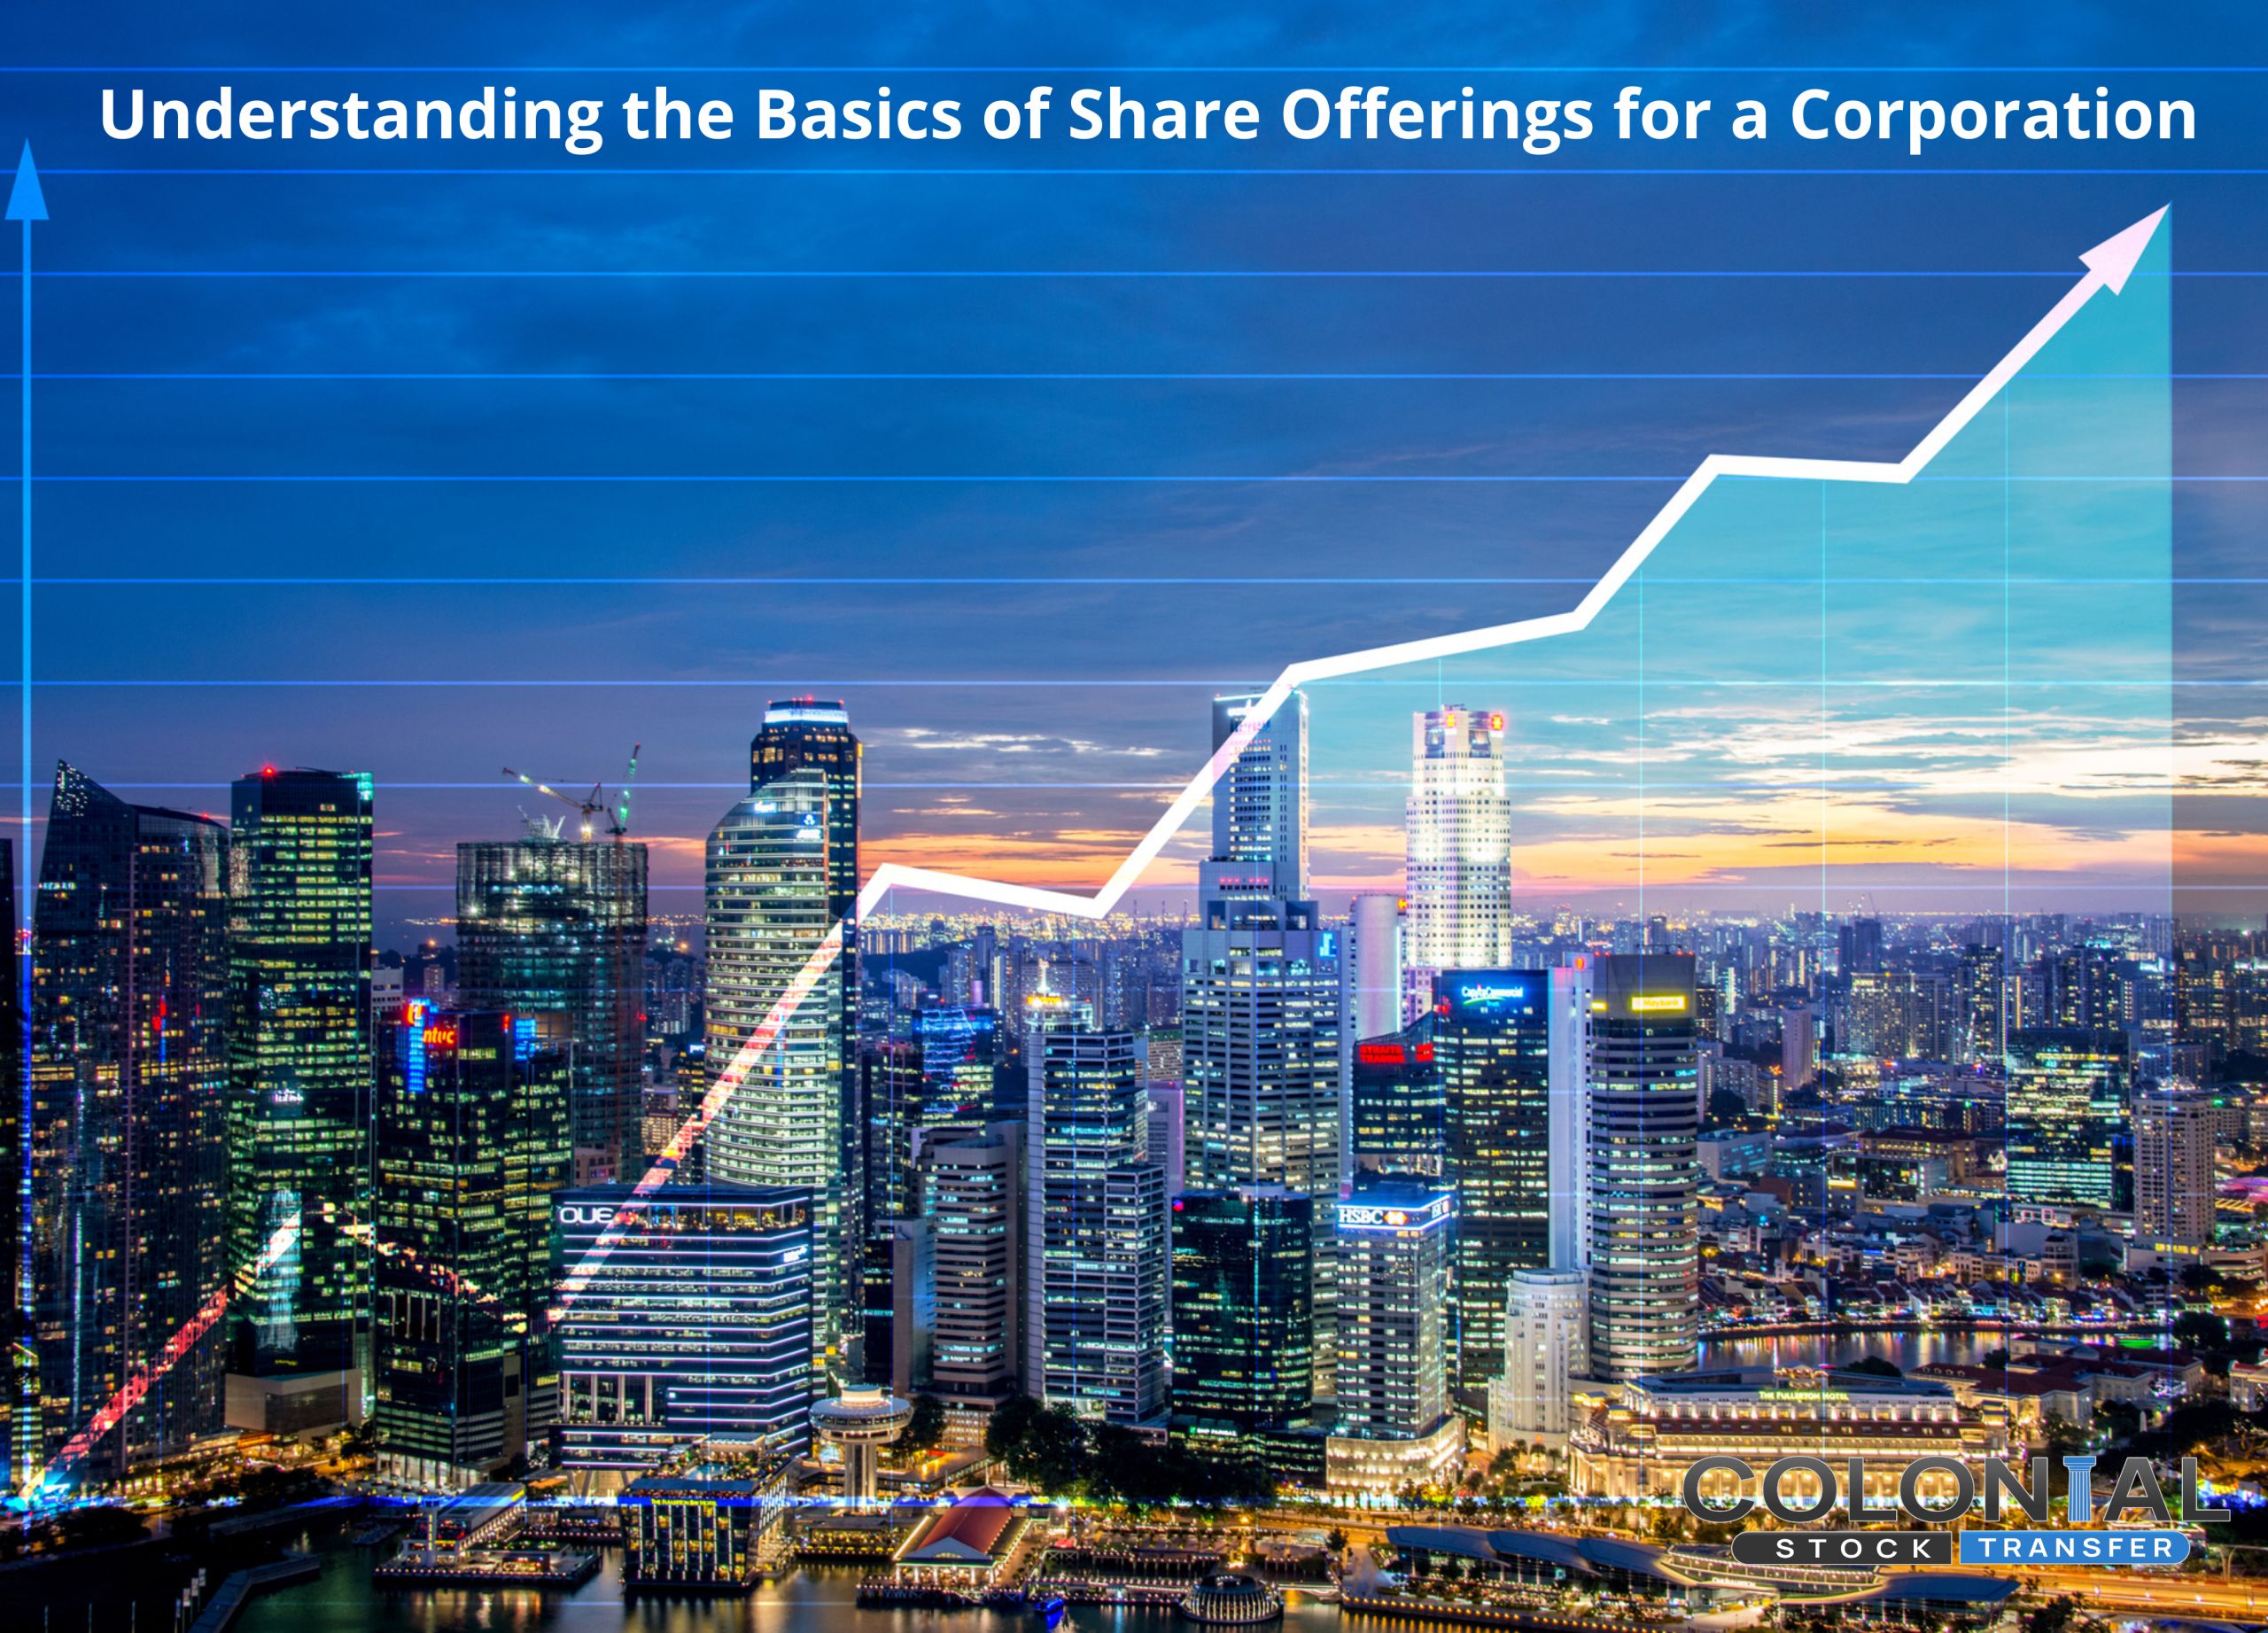 Understanding the Basics of Share Offerings for a Corporation